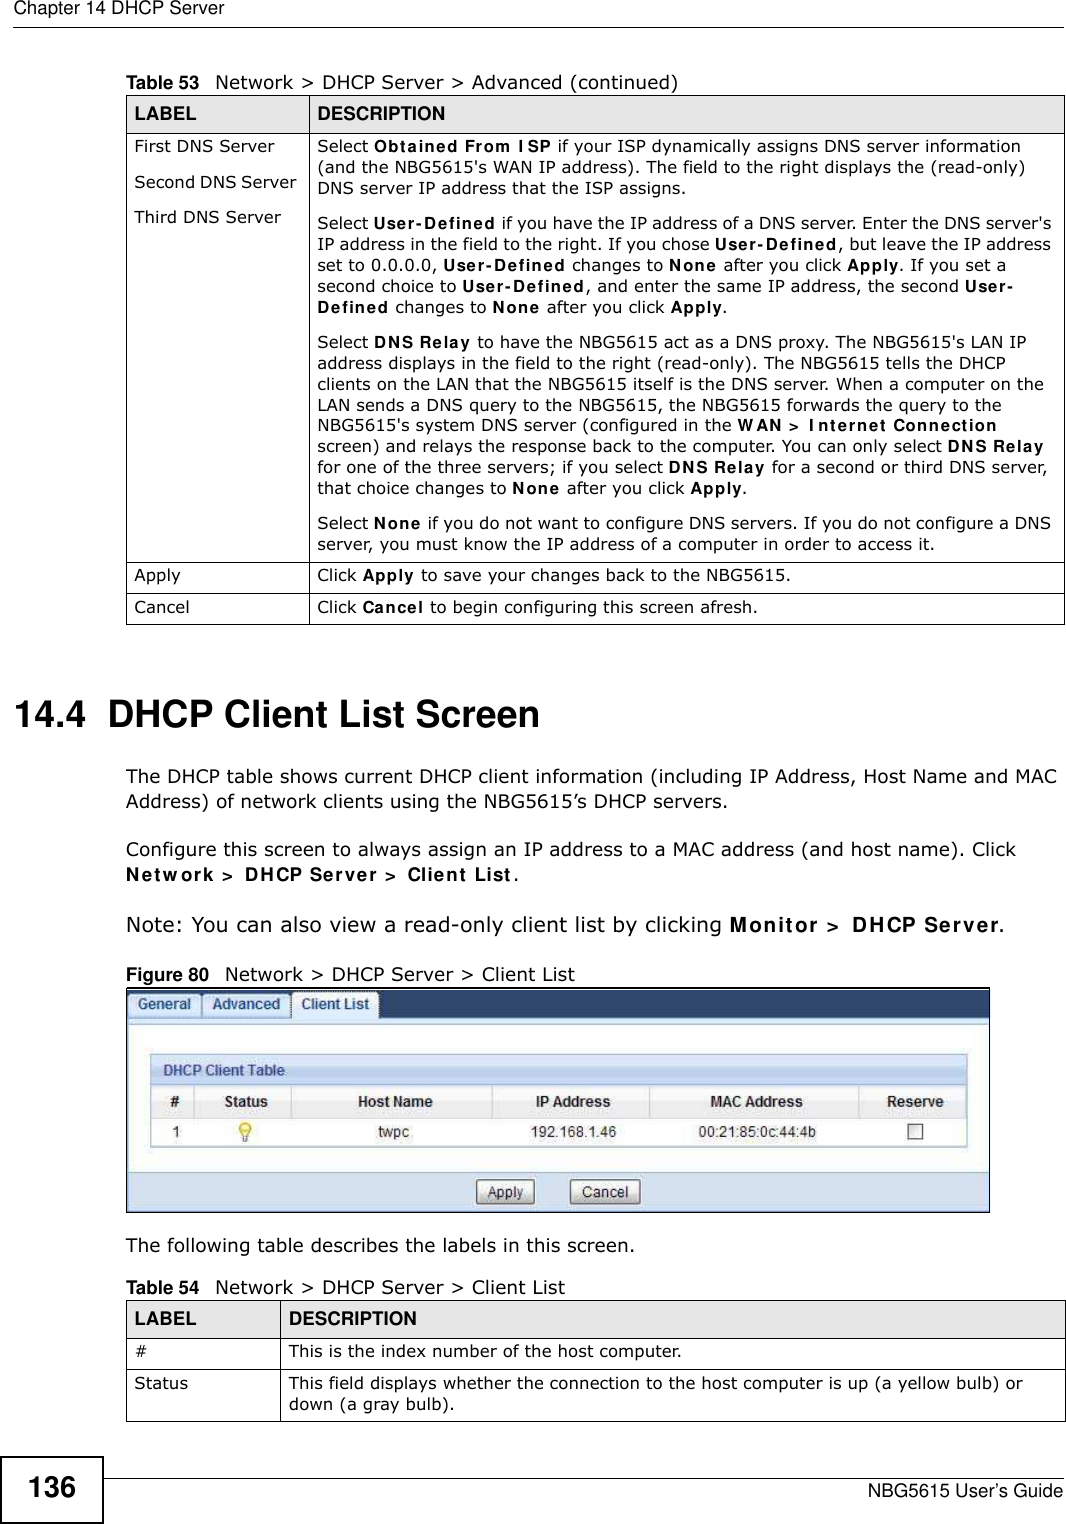 Chapter 14 DHCP ServerNBG5615 User’s Guide13614.4  DHCP Client List ScreenThe DHCP table shows current DHCP client information (including IP Address, Host Name and MAC Address) of network clients using the NBG5615’s DHCP servers.Configure this screen to always assign an IP address to a MAC address (and host name). Click Netw ork &gt;  DHCP Server &gt;  Client List. Note: You can also view a read-only client list by clicking Monitor &gt;  DHCP Server. Figure 80   Network &gt; DHCP Server &gt; Client ListThe following table describes the labels in this screen.First DNS ServerSecond DNS Server Third DNS ServerSelect Obtained From I SP if your ISP dynamically assigns DNS server information (and the NBG5615&apos;s WAN IP address). The field to the right displays the (read-only) DNS server IP address that the ISP assigns. Select User-Defined if you have the IP address of a DNS server. Enter the DNS server&apos;s IP address in the field to the right. If you chose User-Defined, but leave the IP address set to 0.0.0.0, User-Defined changes to None after you click Apply. If you set a second choice to User- Defined, and enter the same IP address, the second User-Defined changes to None after you click Apply. Select DNS Relay to have the NBG5615 act as a DNS proxy. The NBG5615&apos;s LAN IP address displays in the field to the right (read-only). The NBG5615 tells the DHCP clients on the LAN that the NBG5615 itself is the DNS server. When a computer on the LAN sends a DNS query to the NBG5615, the NBG5615 forwards the query to the NBG5615&apos;s system DNS server (configured in the W AN &gt;  I nternet Connection screen) and relays the response back to the computer. You can only select DNS Relay for one of the three servers; if you select DNS Relay for a second or third DNS server, that choice changes to None after you click Apply. Select None if you do not want to configure DNS servers. If you do not configure a DNS server, you must know the IP address of a computer in order to access it.Apply Click Apply to save your changes back to the NBG5615.Cancel Click Cancel to begin configuring this screen afresh.Table 53   Network &gt; DHCP Server &gt; Advanced (continued)LABEL DESCRIPTIONTable 54   Network &gt; DHCP Server &gt; Client ListLABEL  DESCRIPTION#  This is the index number of the host computer.Status This field displays whether the connection to the host computer is up (a yellow bulb) or down (a gray bulb).